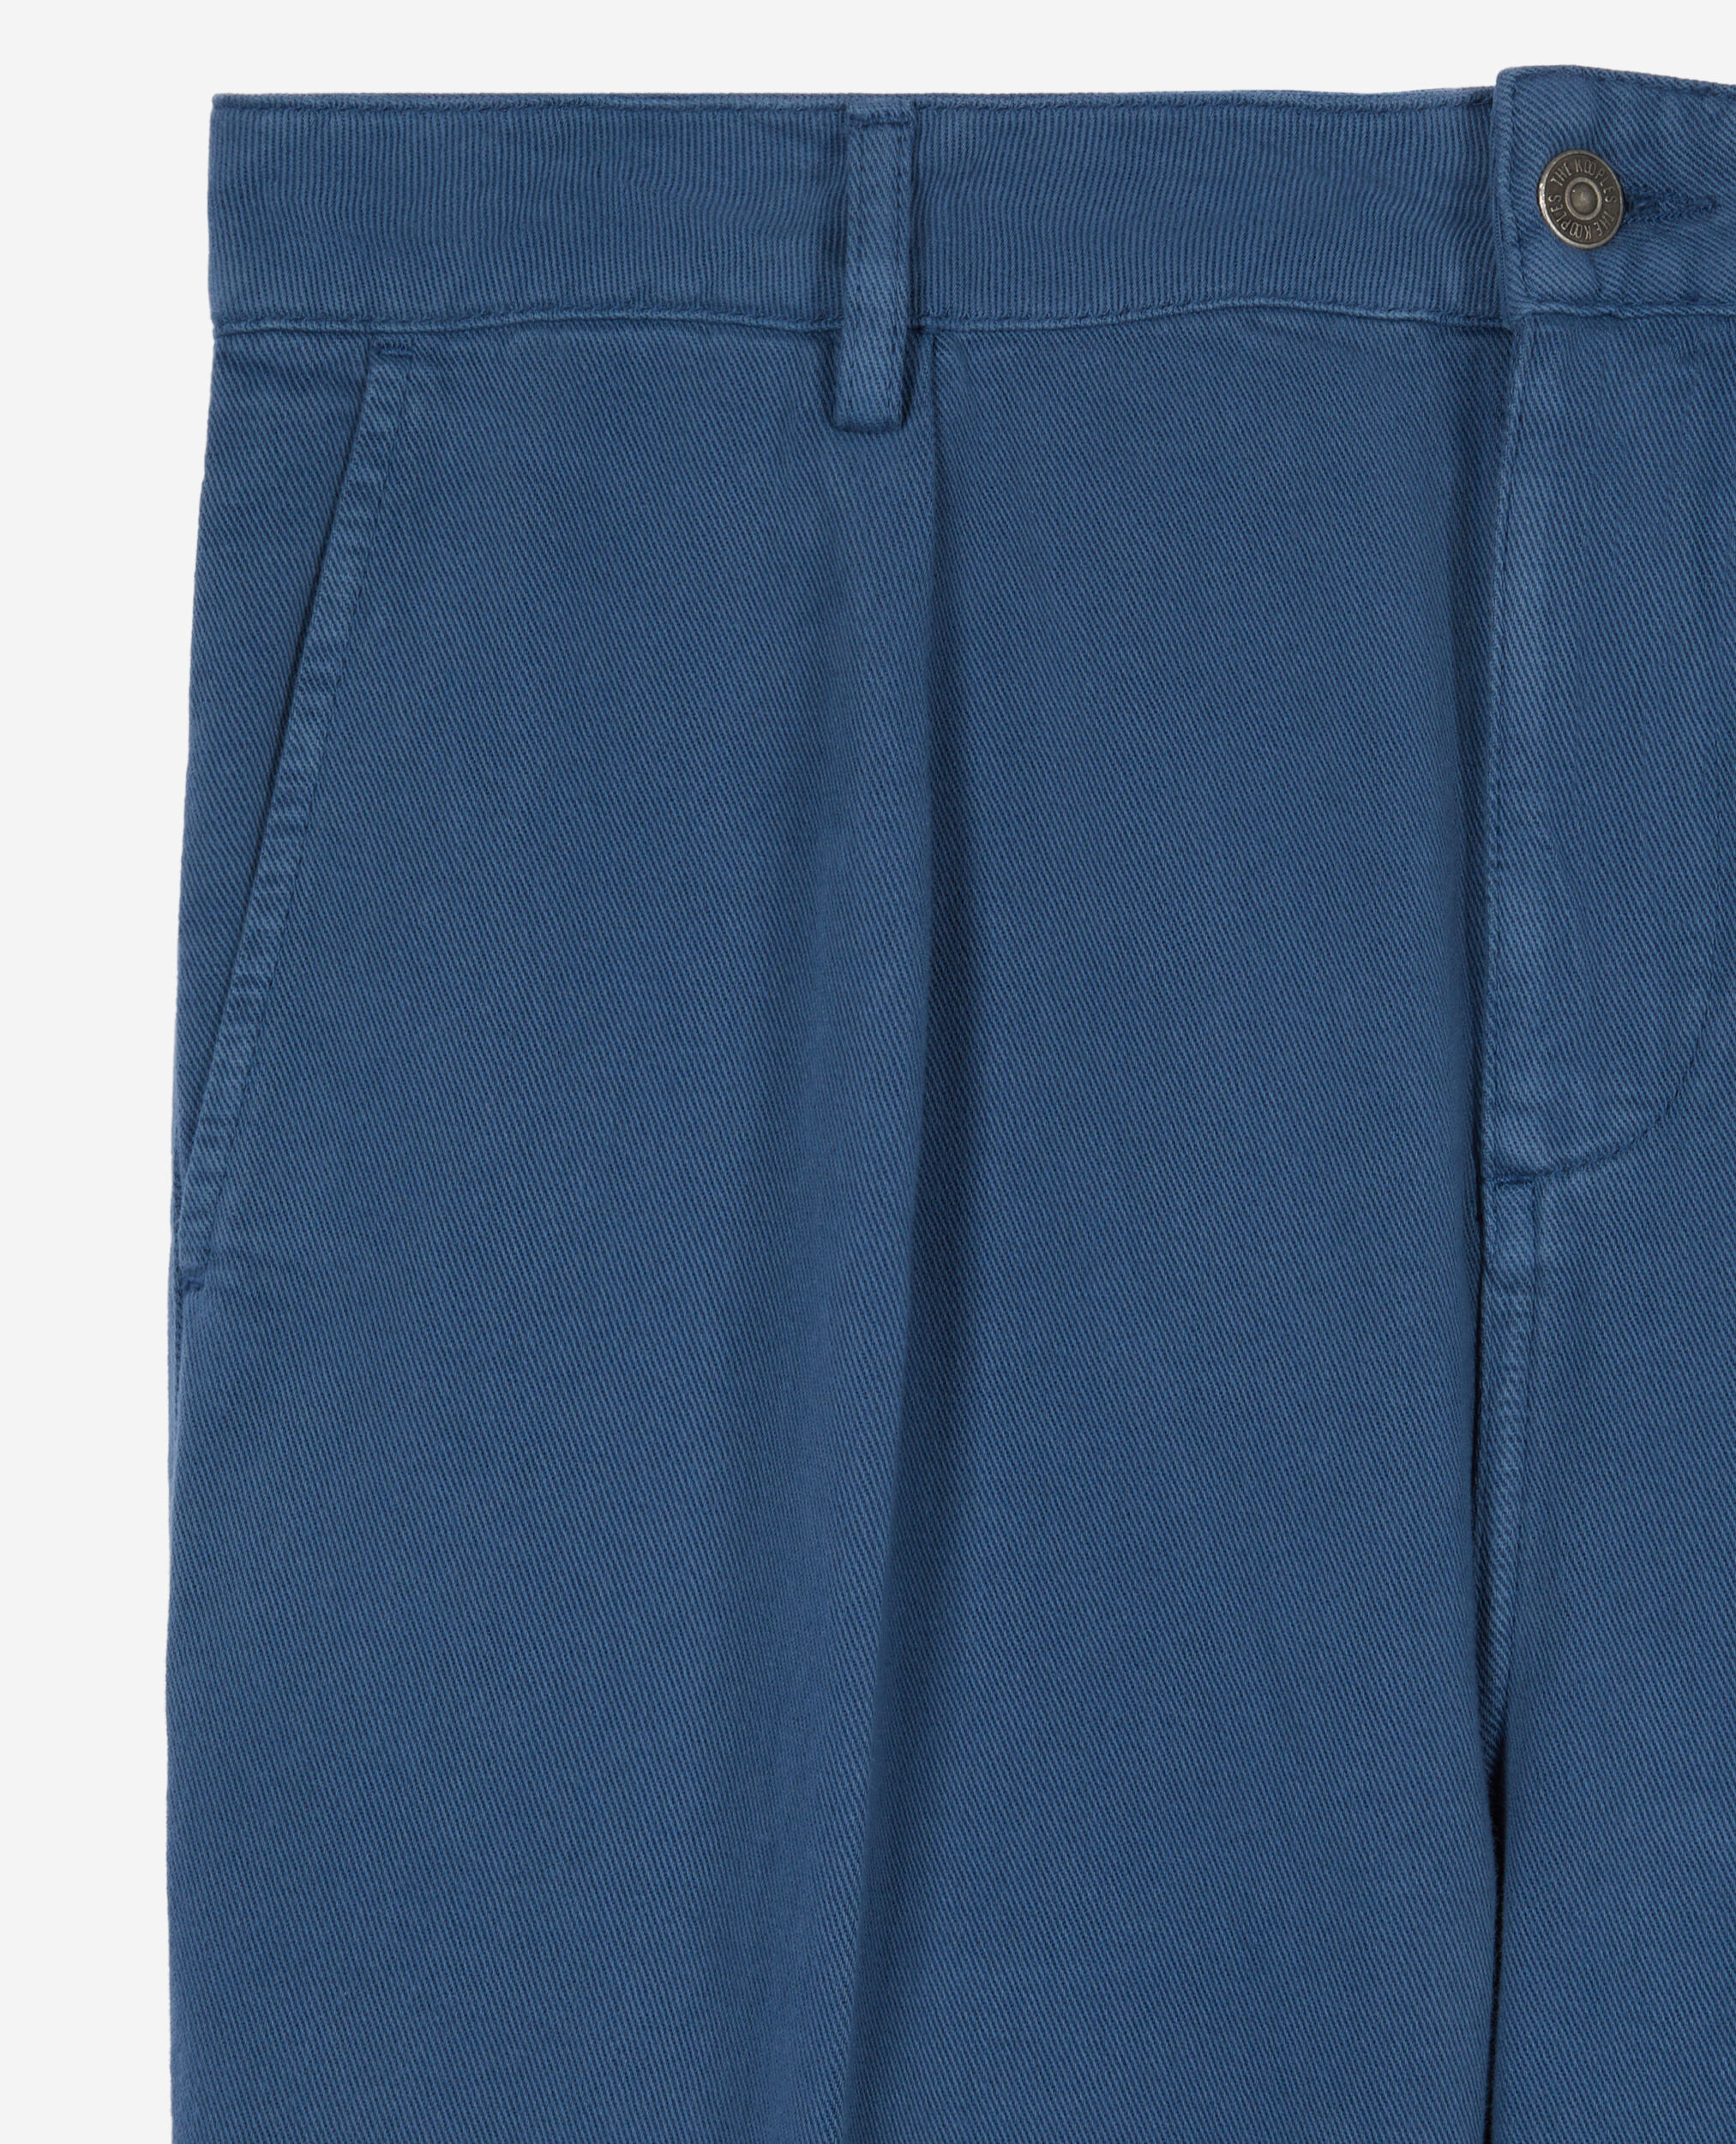 Navy blue cotton and linen trousers with pleats, MIDDLE NAVY, hi-res image number null